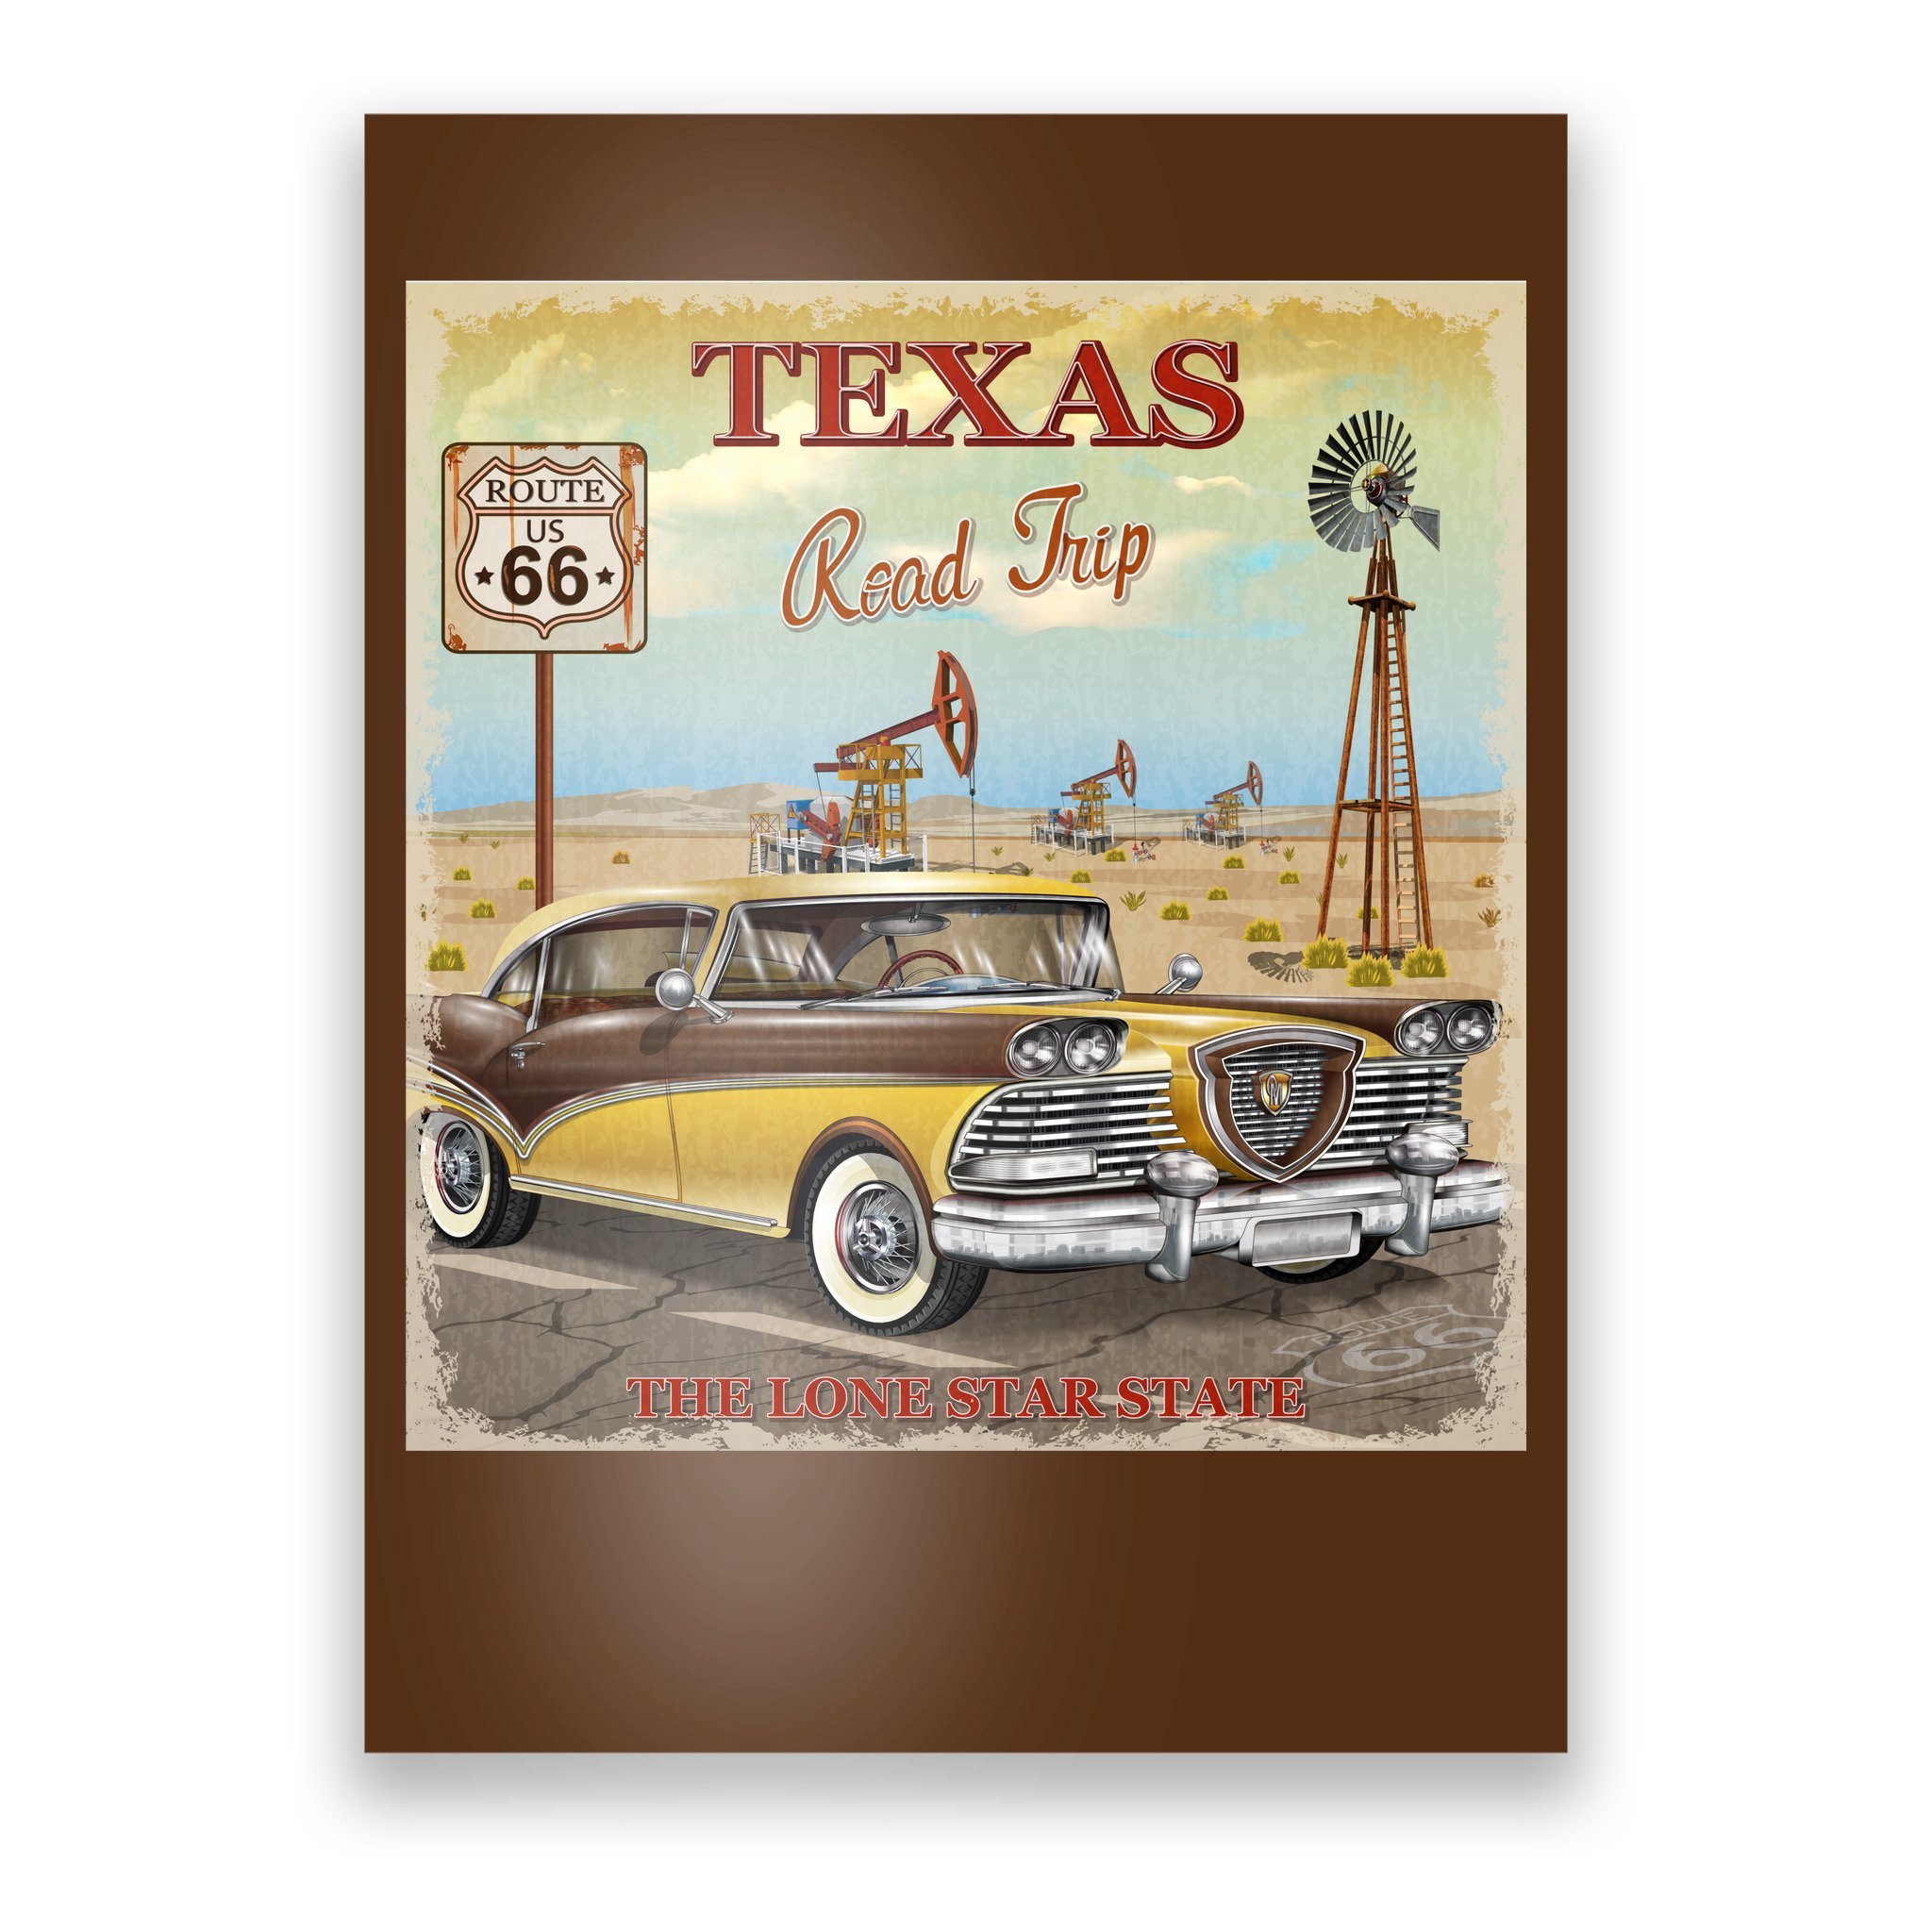 Texas Route 66 Vintage Motorcycle  United States Vintage Travel Art Poster Print 